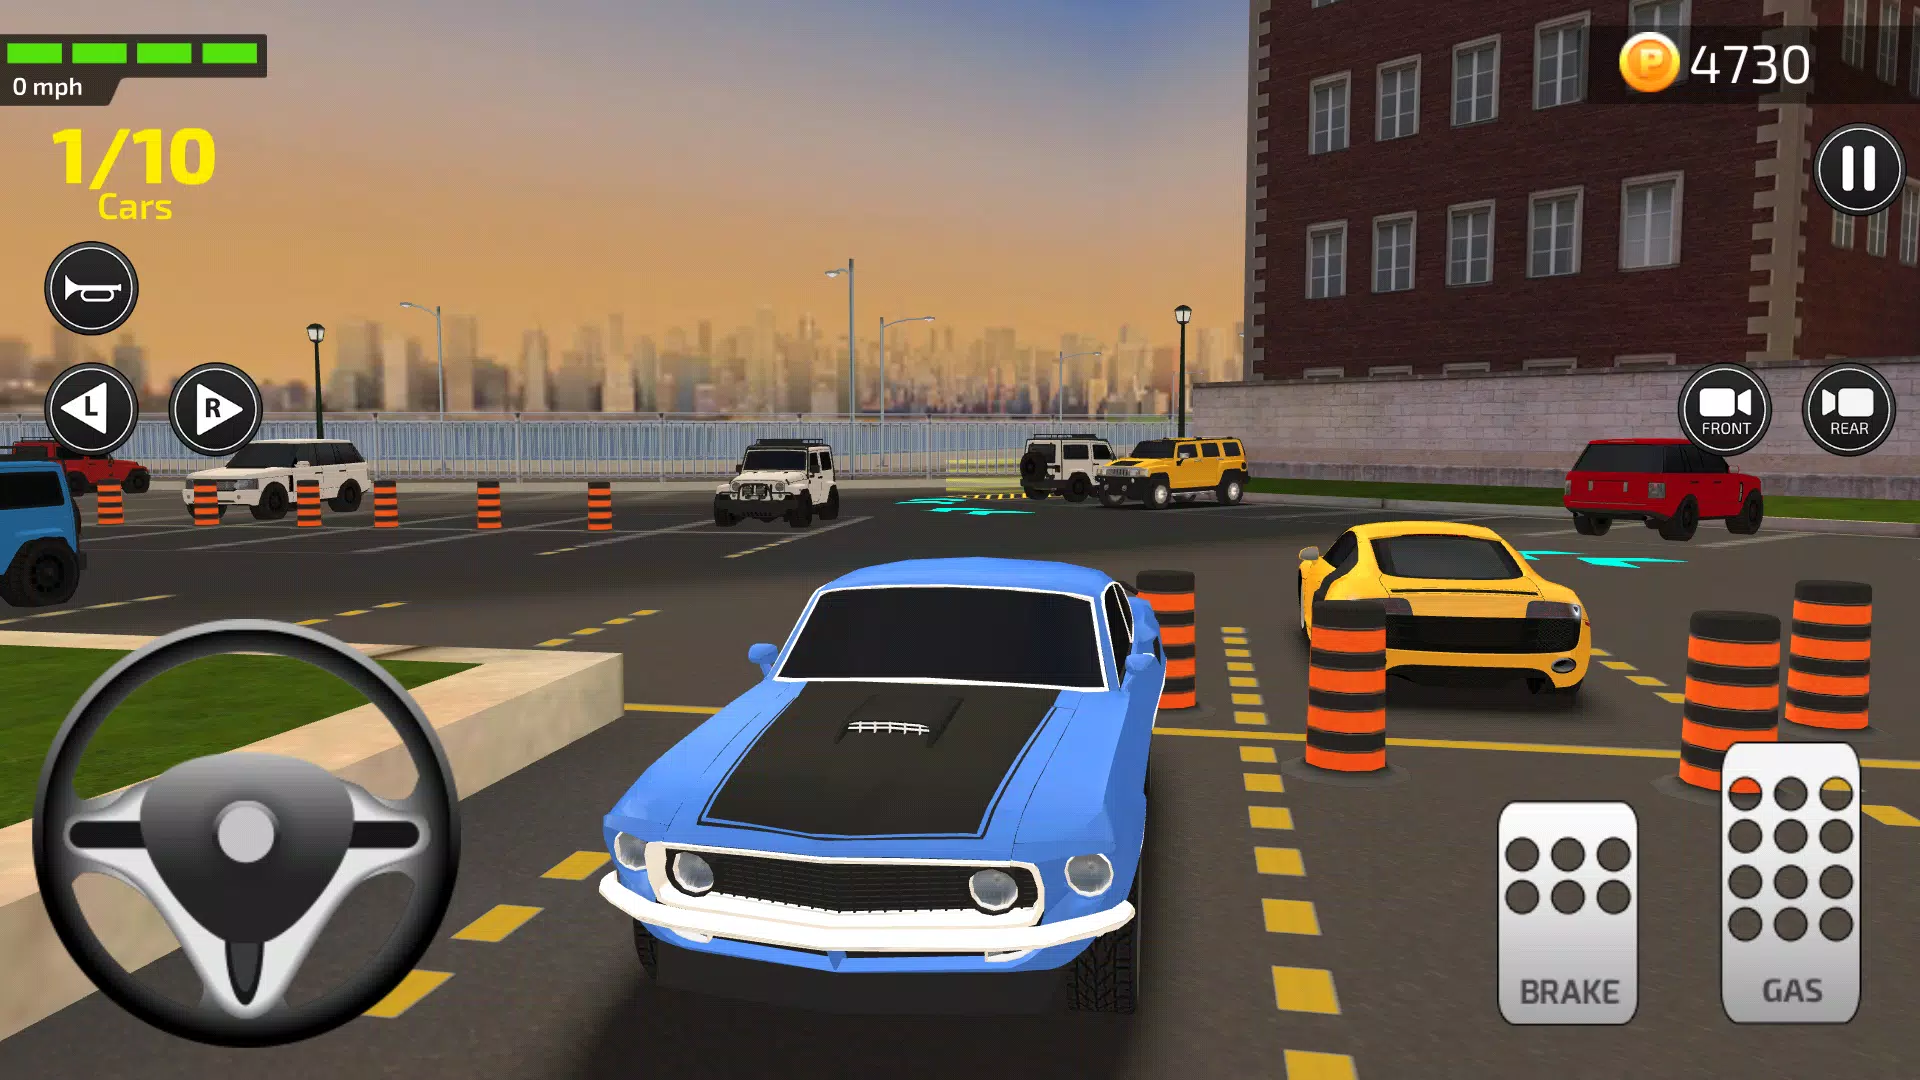 Parking Frenzy 2.0 3D Game #10 - Car Games Android IOS gameplay #carsgames